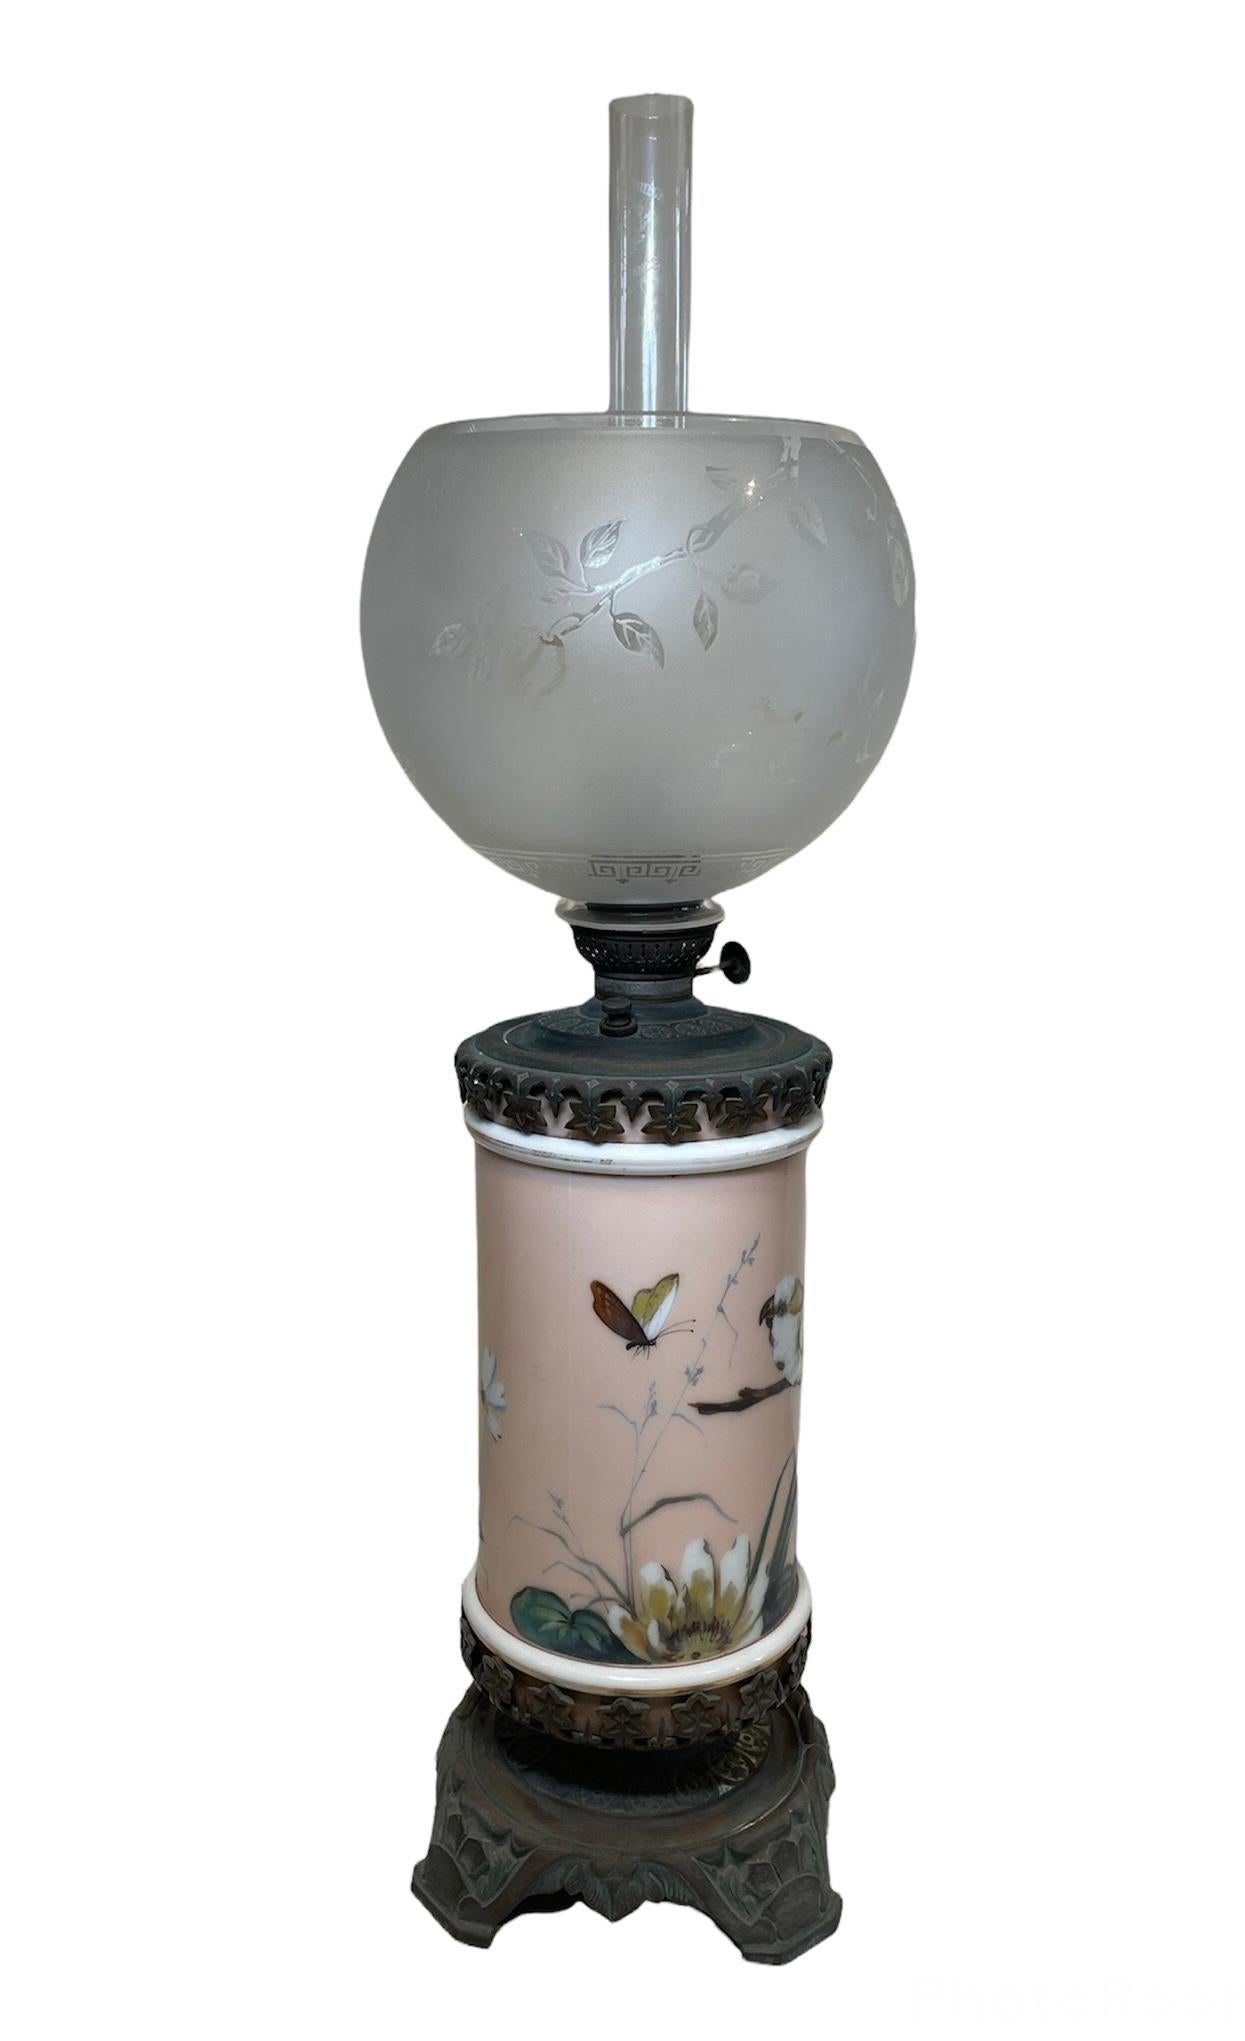 This is a hurricane oil lamp made of bronze and porcelain. It depicts a cylindrical shaped porcelain font hand painted with a light pink background embellished by some flowers and a nature scene of a cockatiel standing in a branch observing a